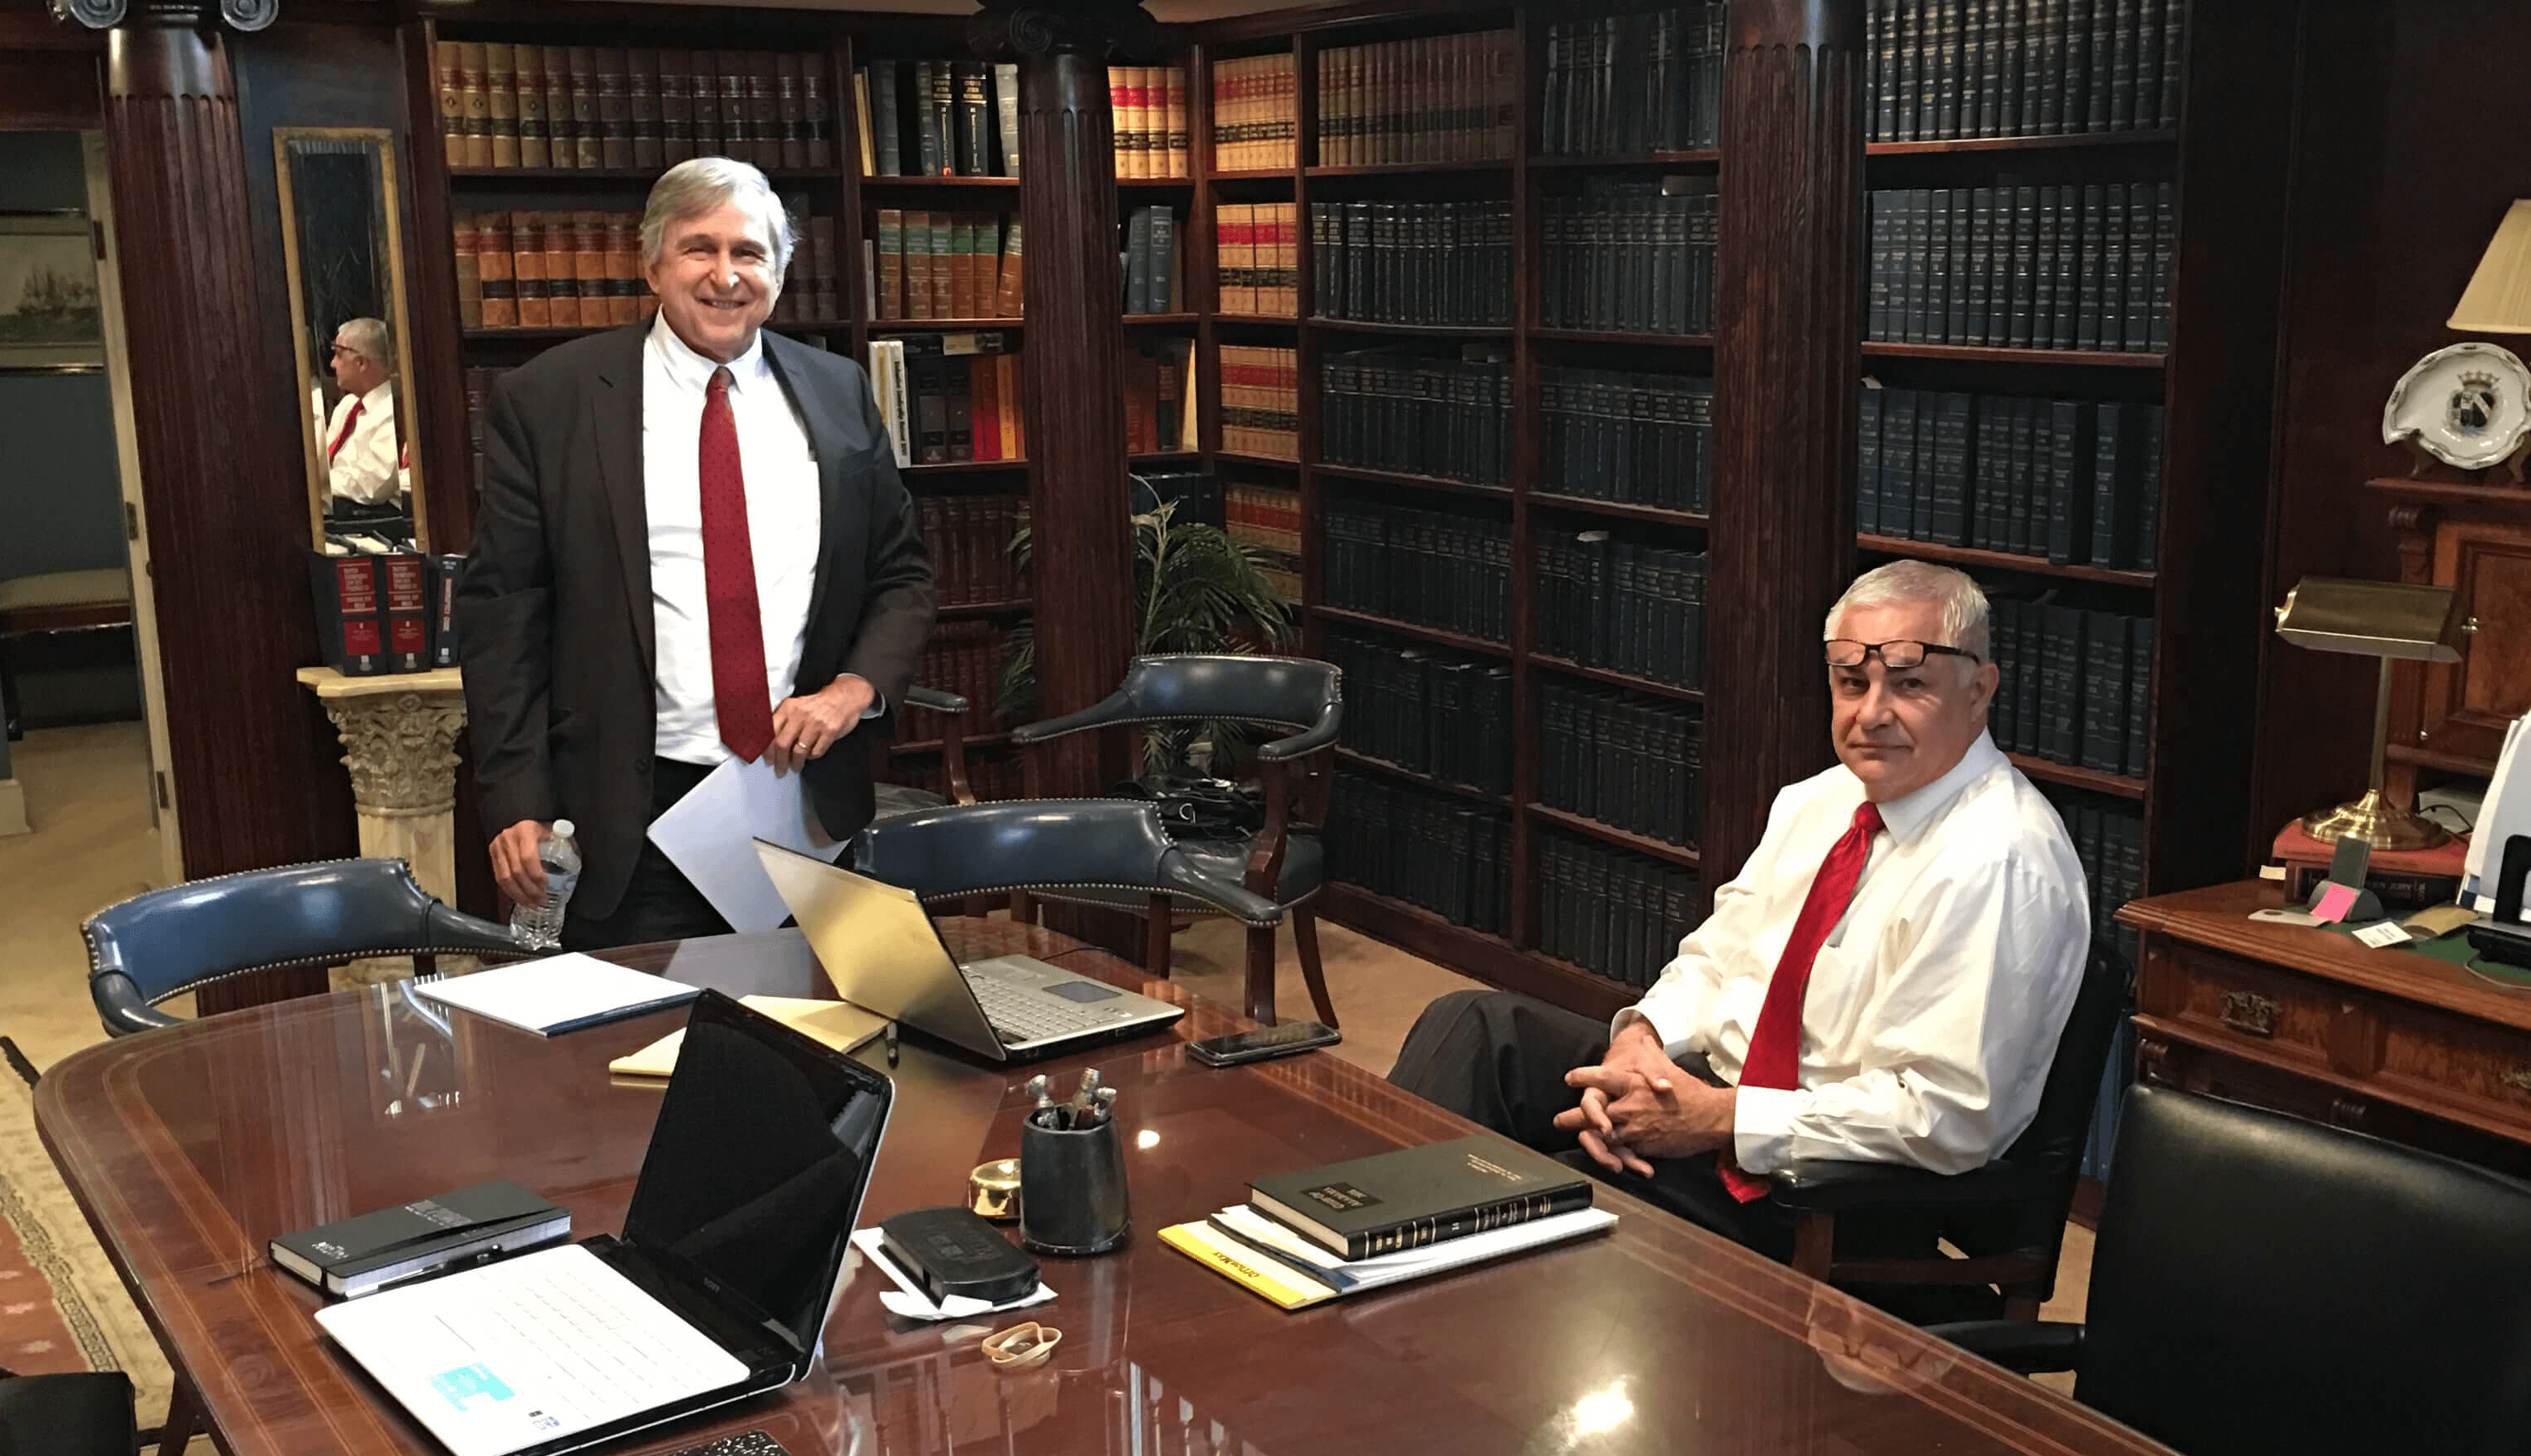 Knight and Morris. Alabama Attorney at law